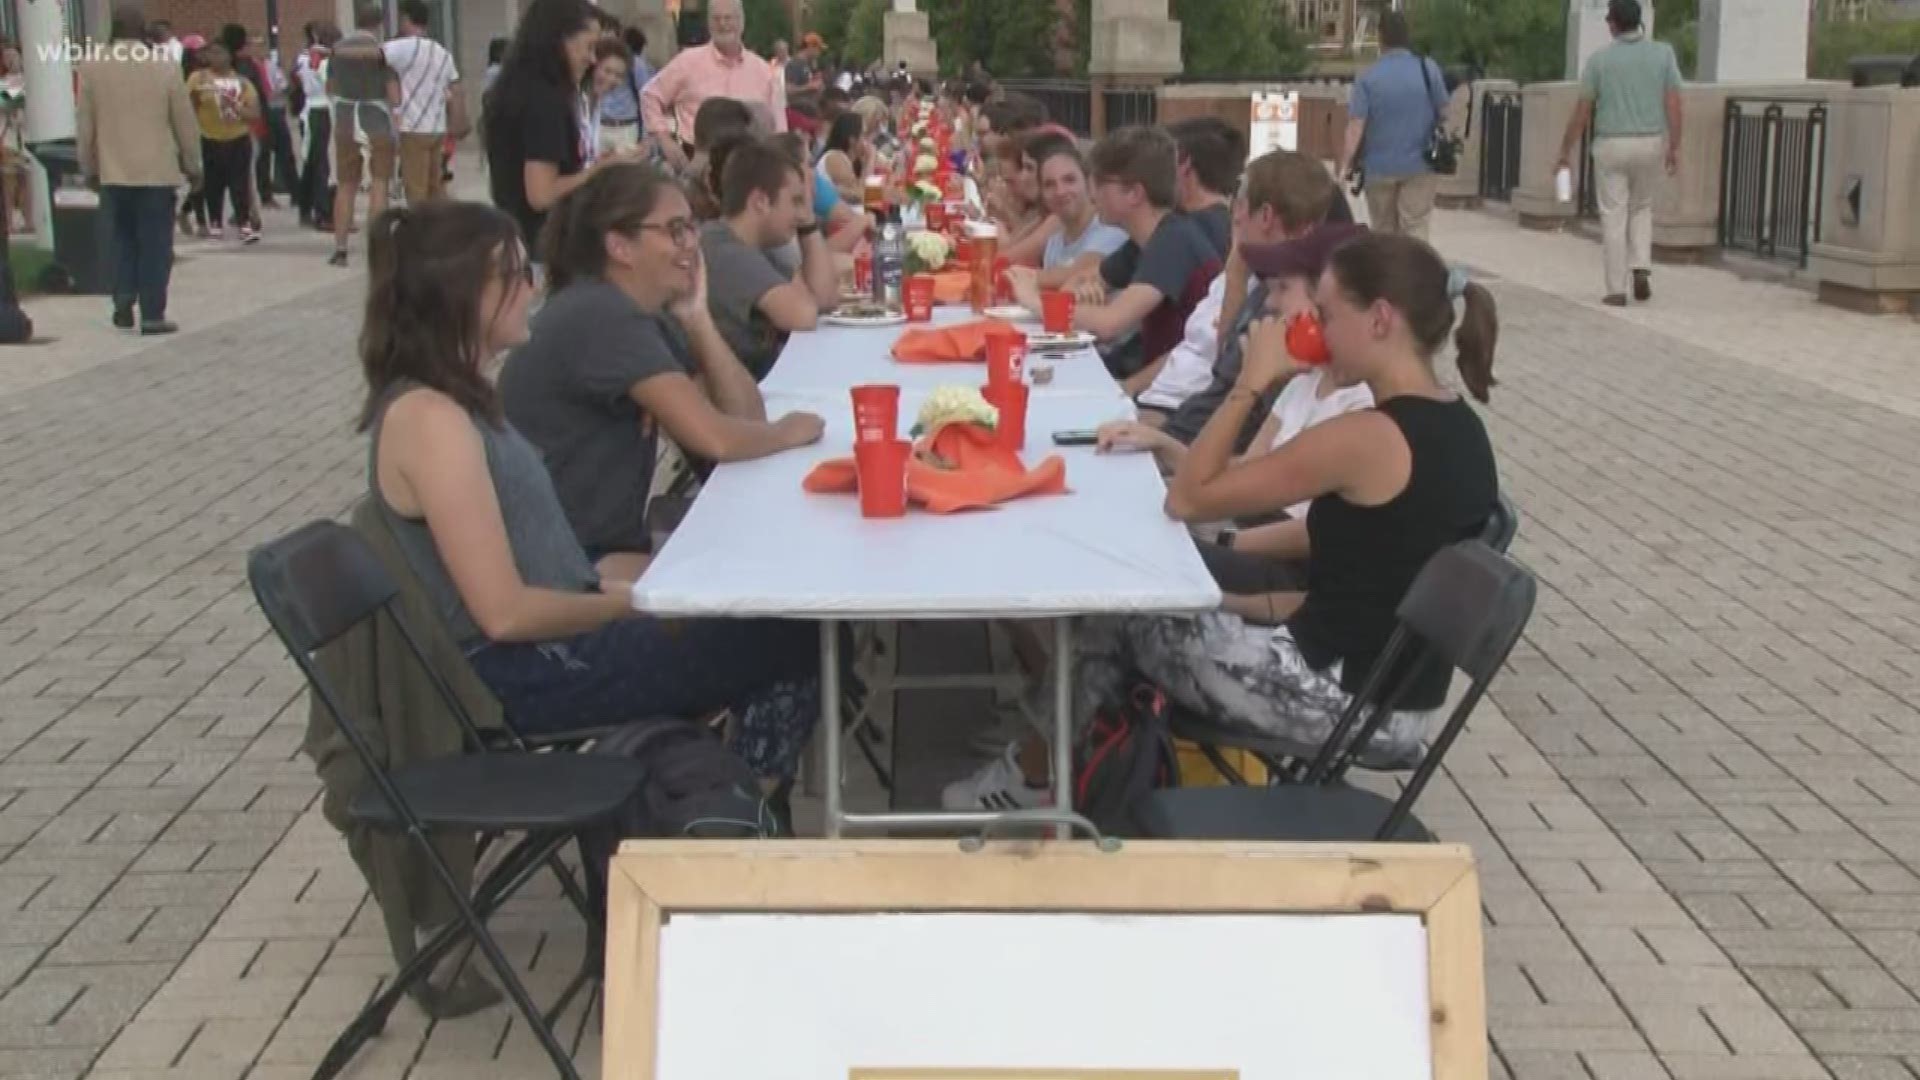 UT held a dinner where the first 500 guests were able to meet and greet others from all over the world at one table.